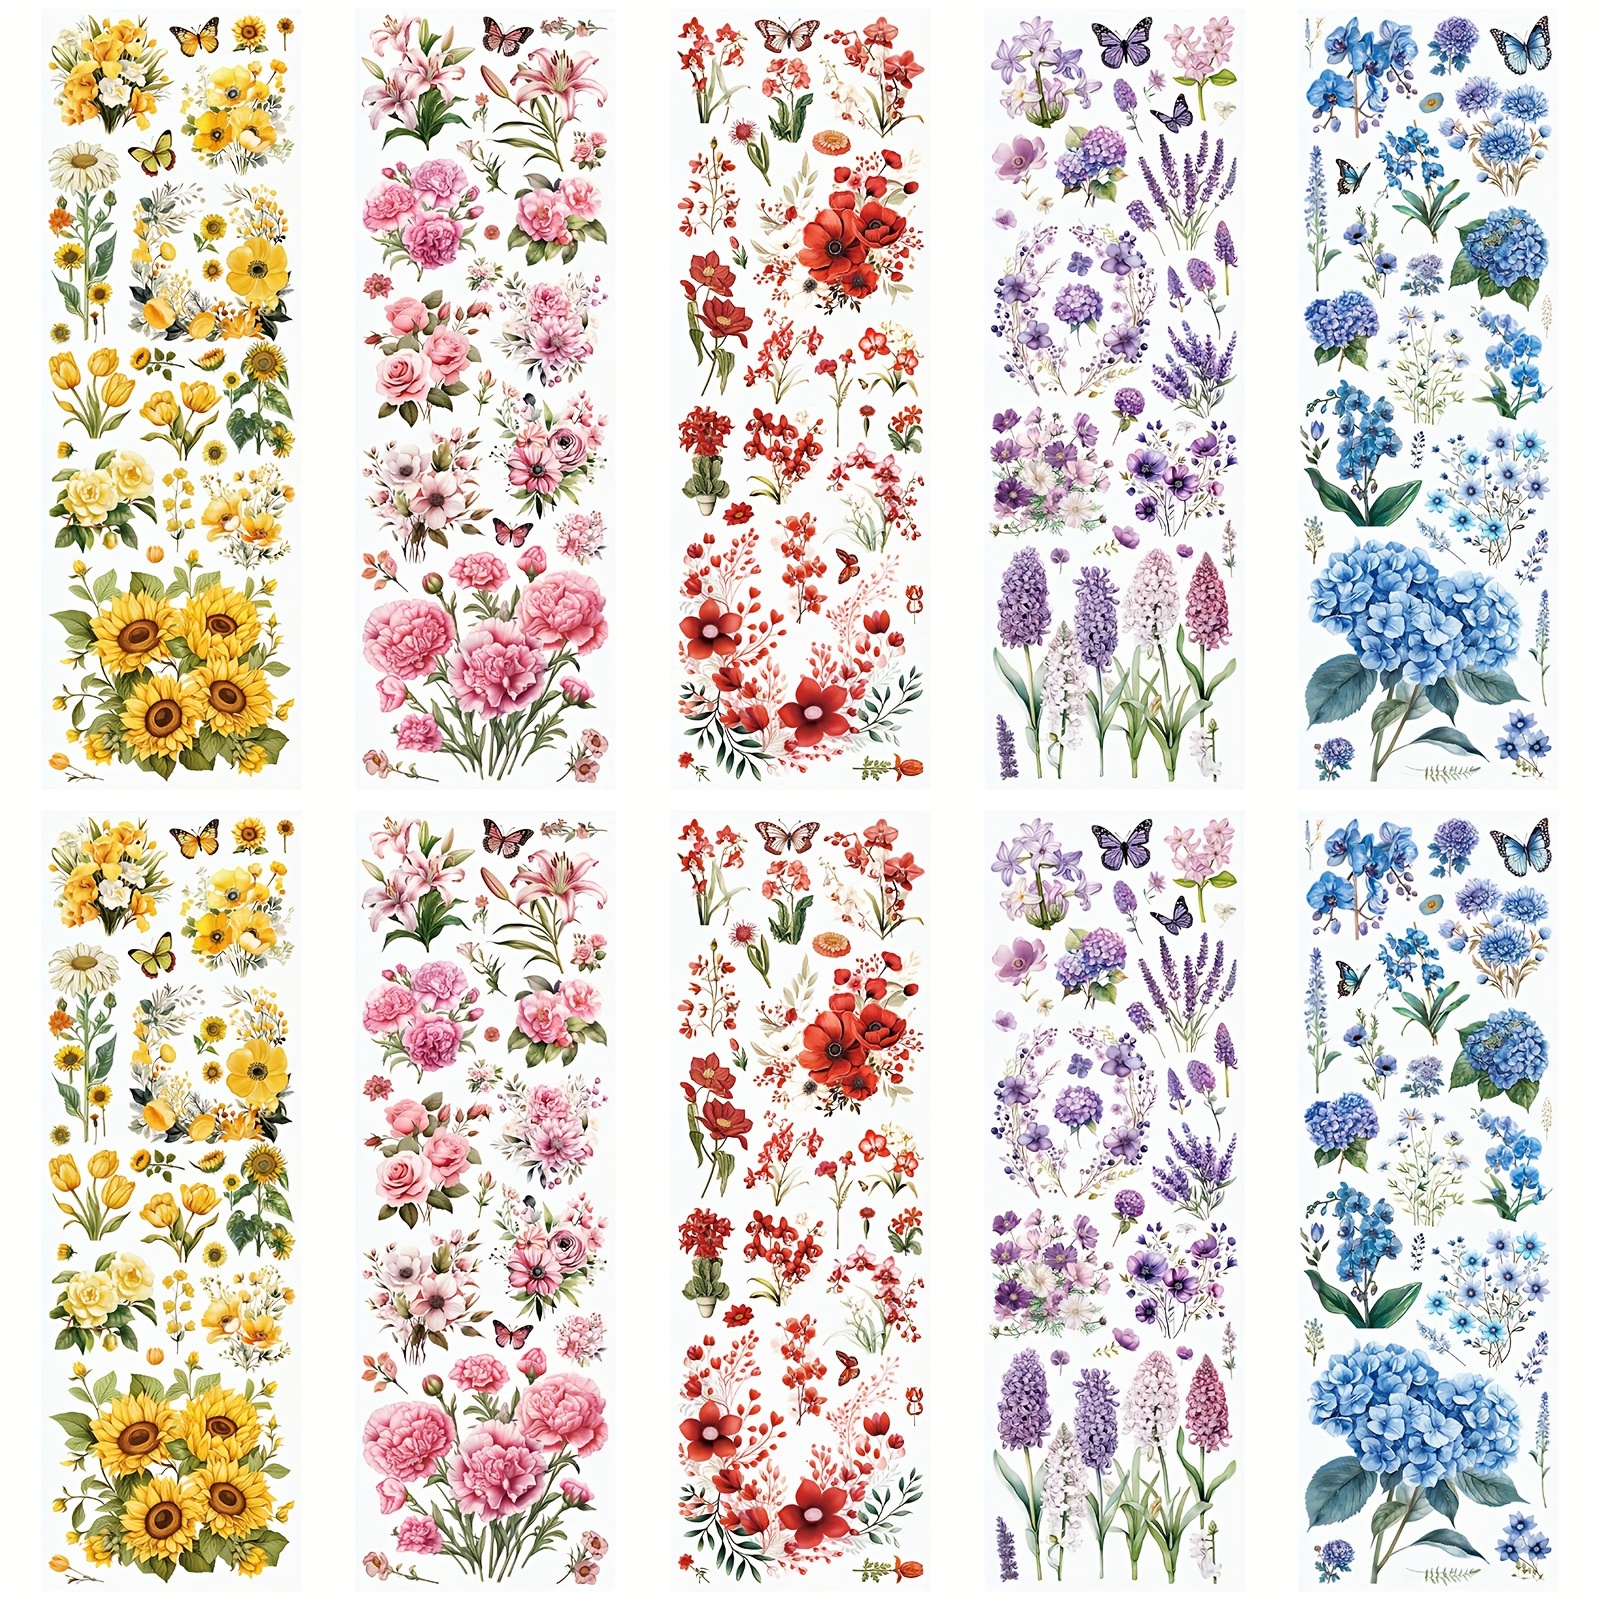 

10 Sheets Rub On Transfer Sticker, Mixed Flower Stickers For Diy Scrapbooking Photo Albums Furniture, 11.8 * 3.9in